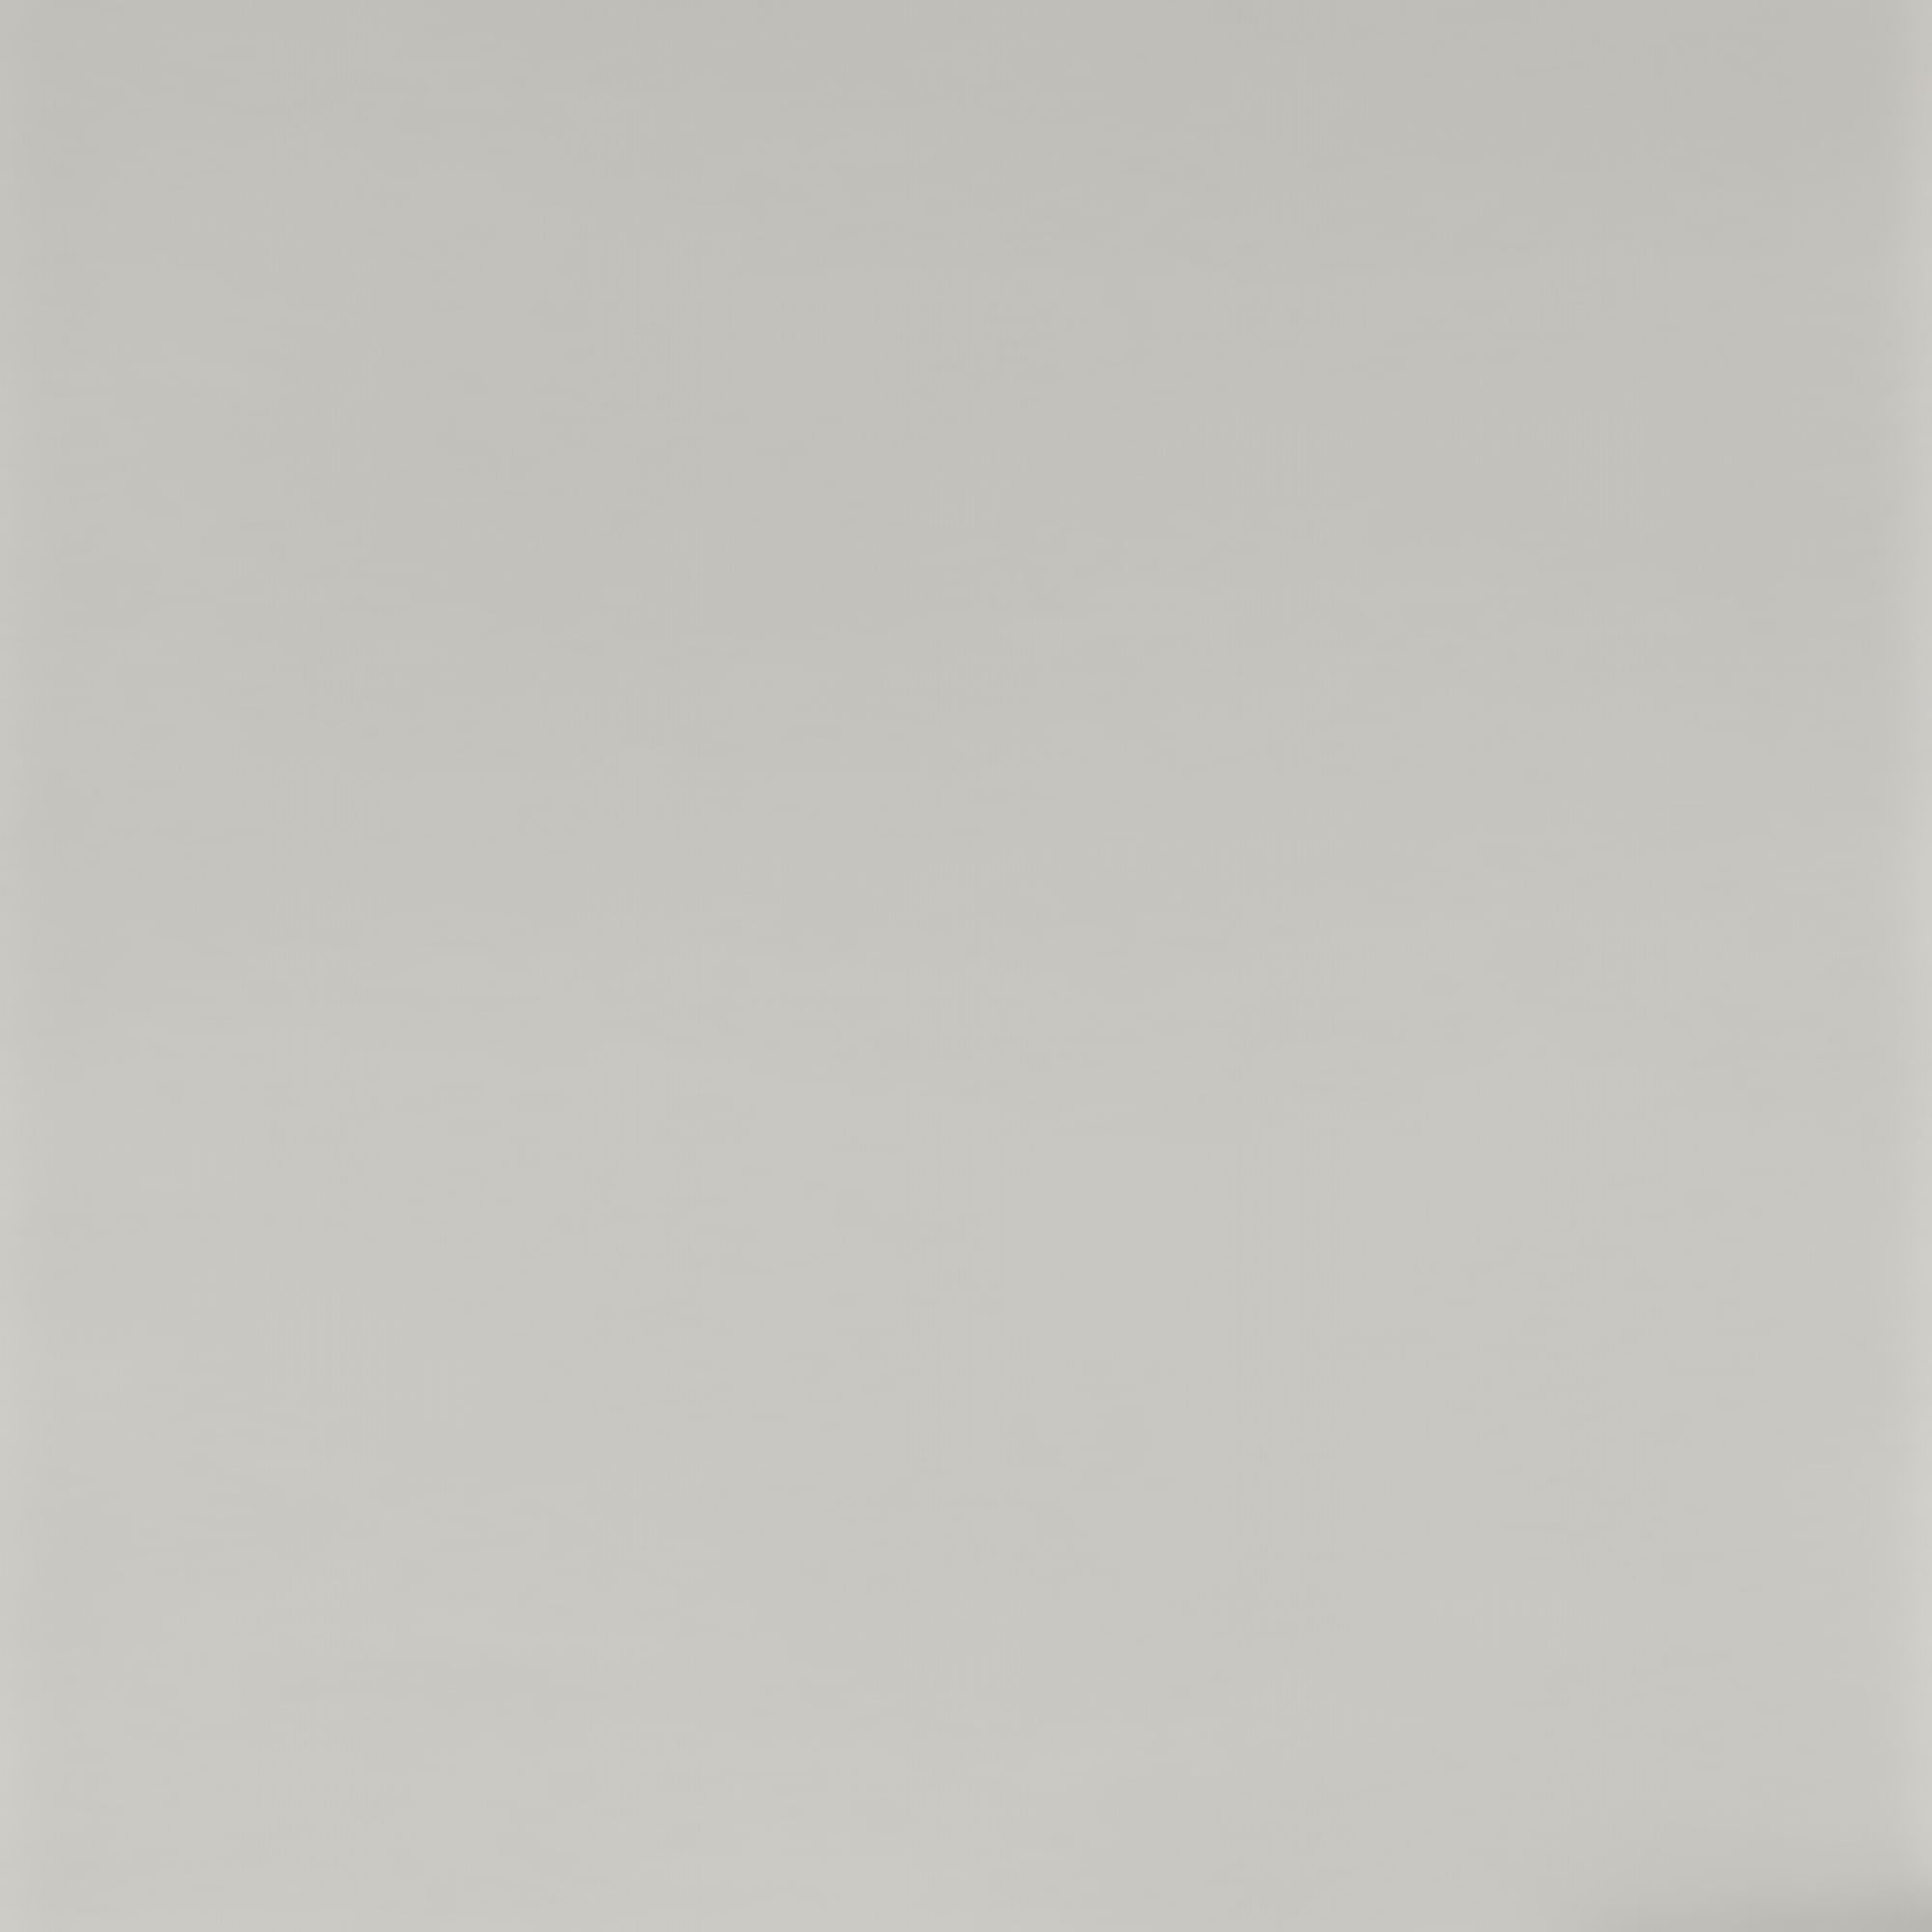 Ivory Gloss Ceramic Wall Tile, Pack of 34, (L)300mm (W)100mm